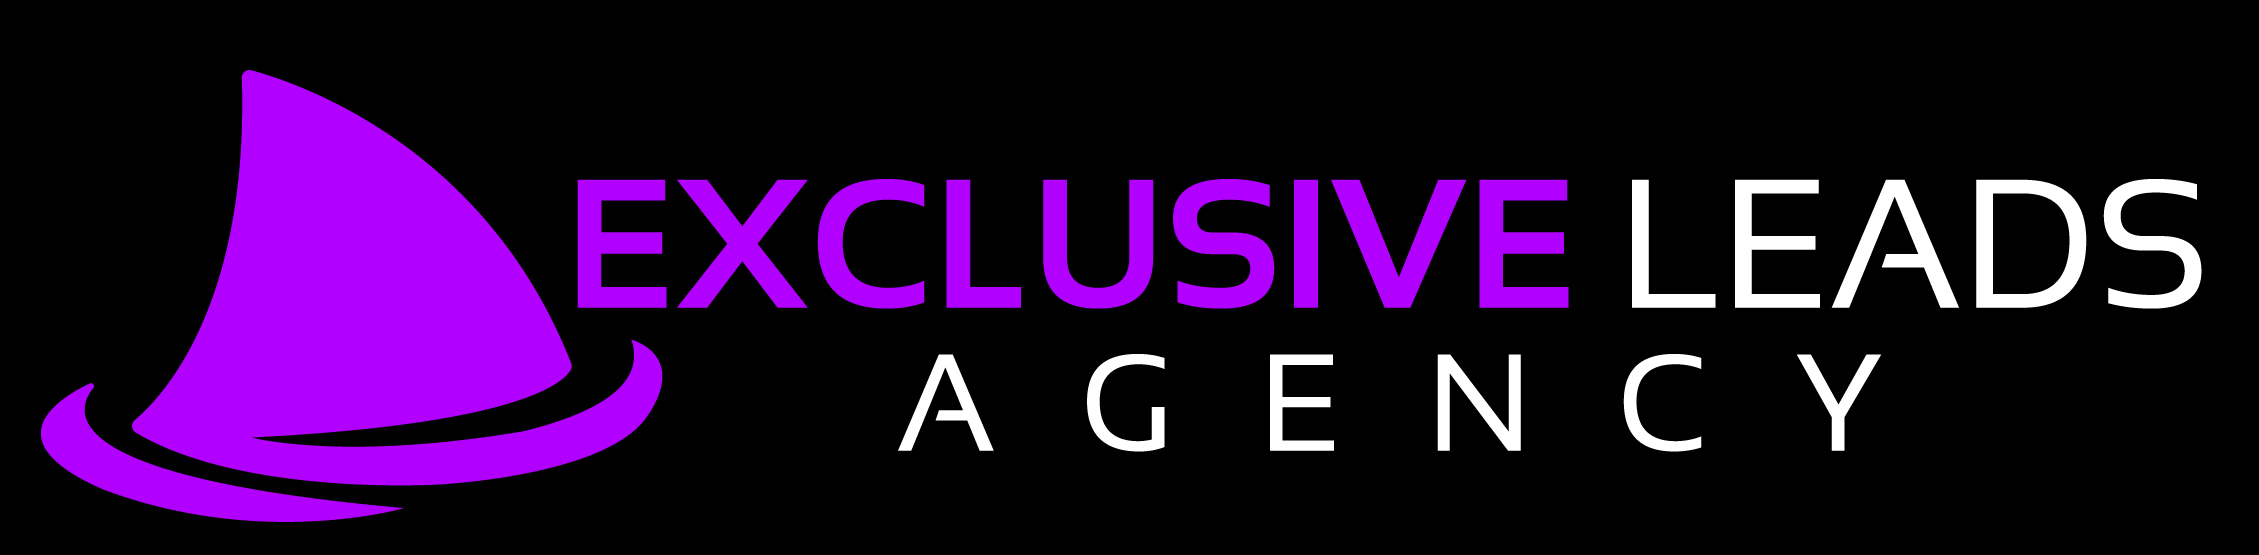 Exclusive Leads Agency's Logo